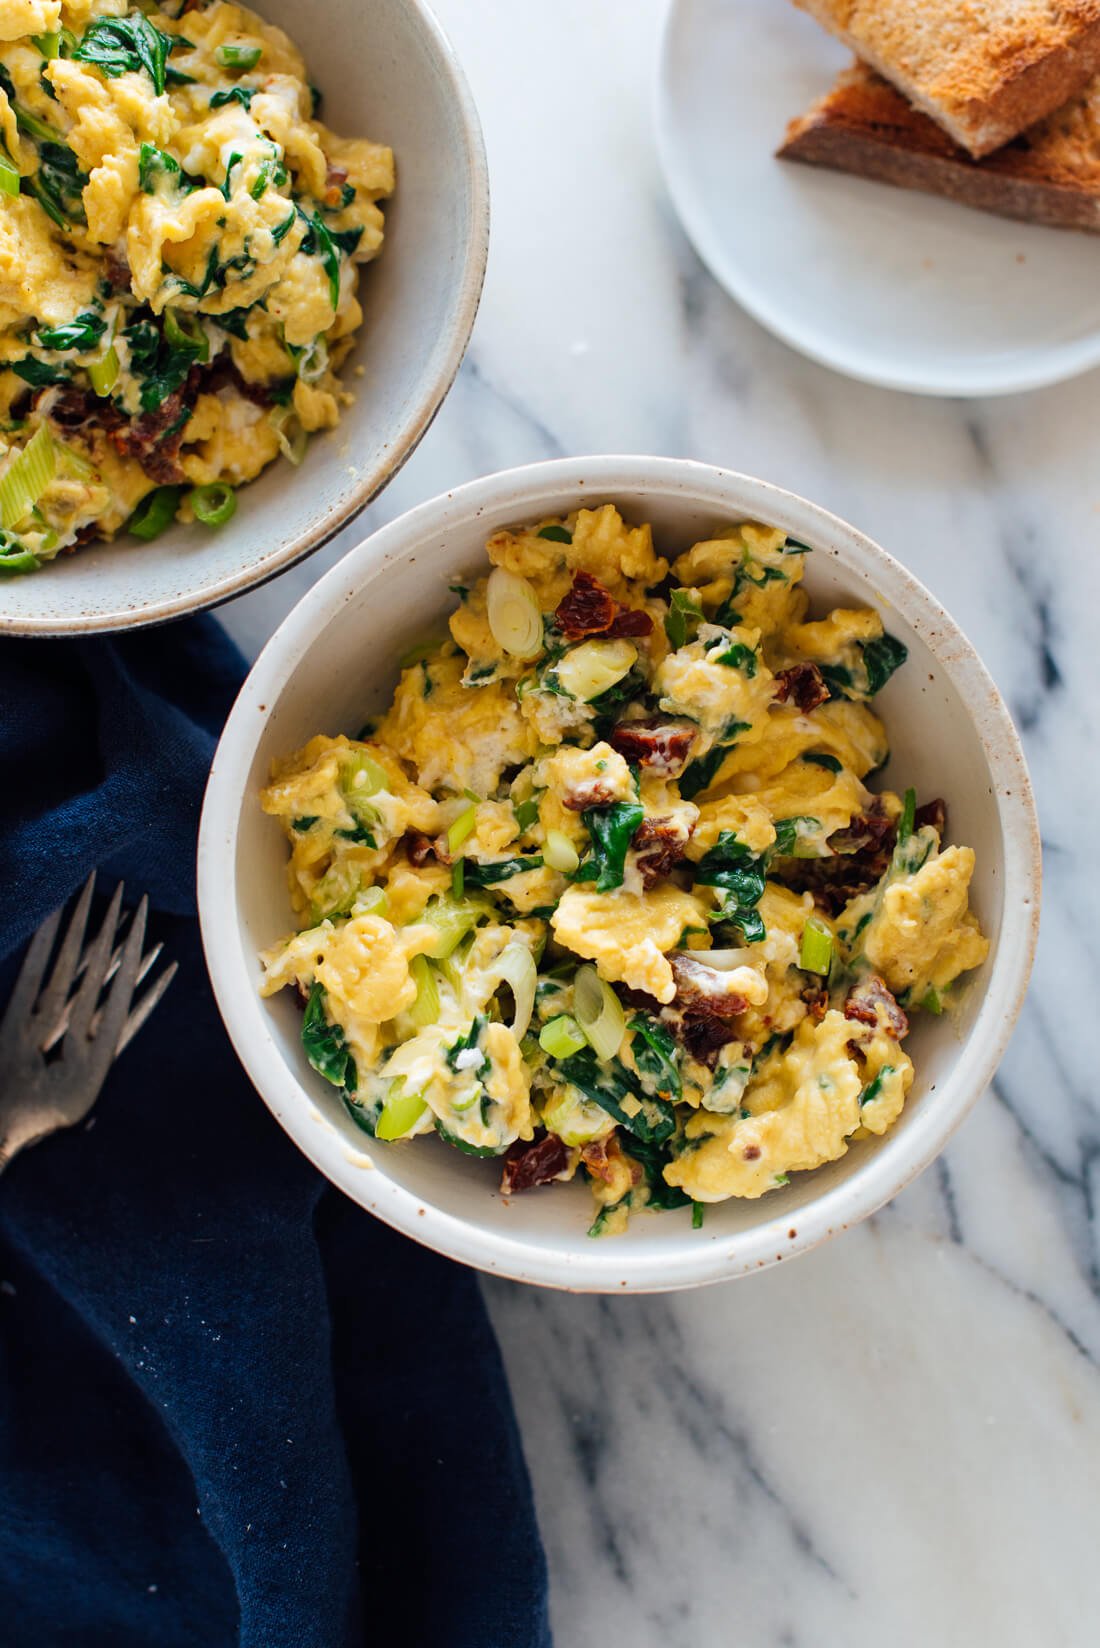 goat cheese scrambled egg recipe with spinach sun-dried tomatoes